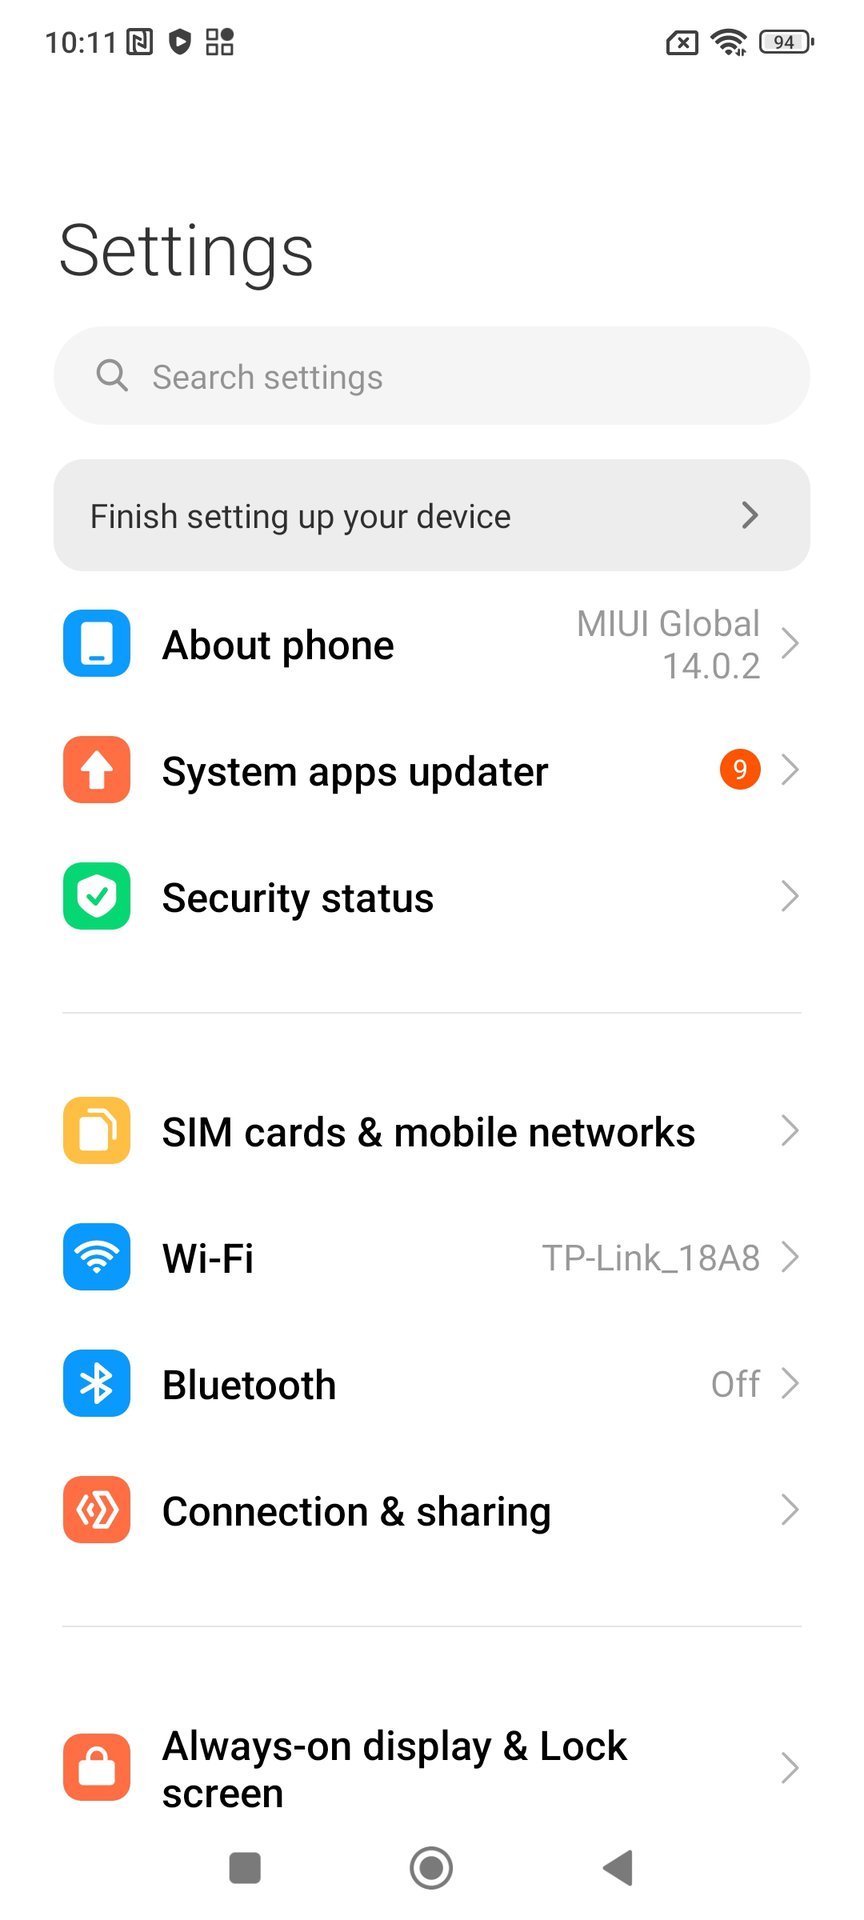 MIUI settings with device setup prompt